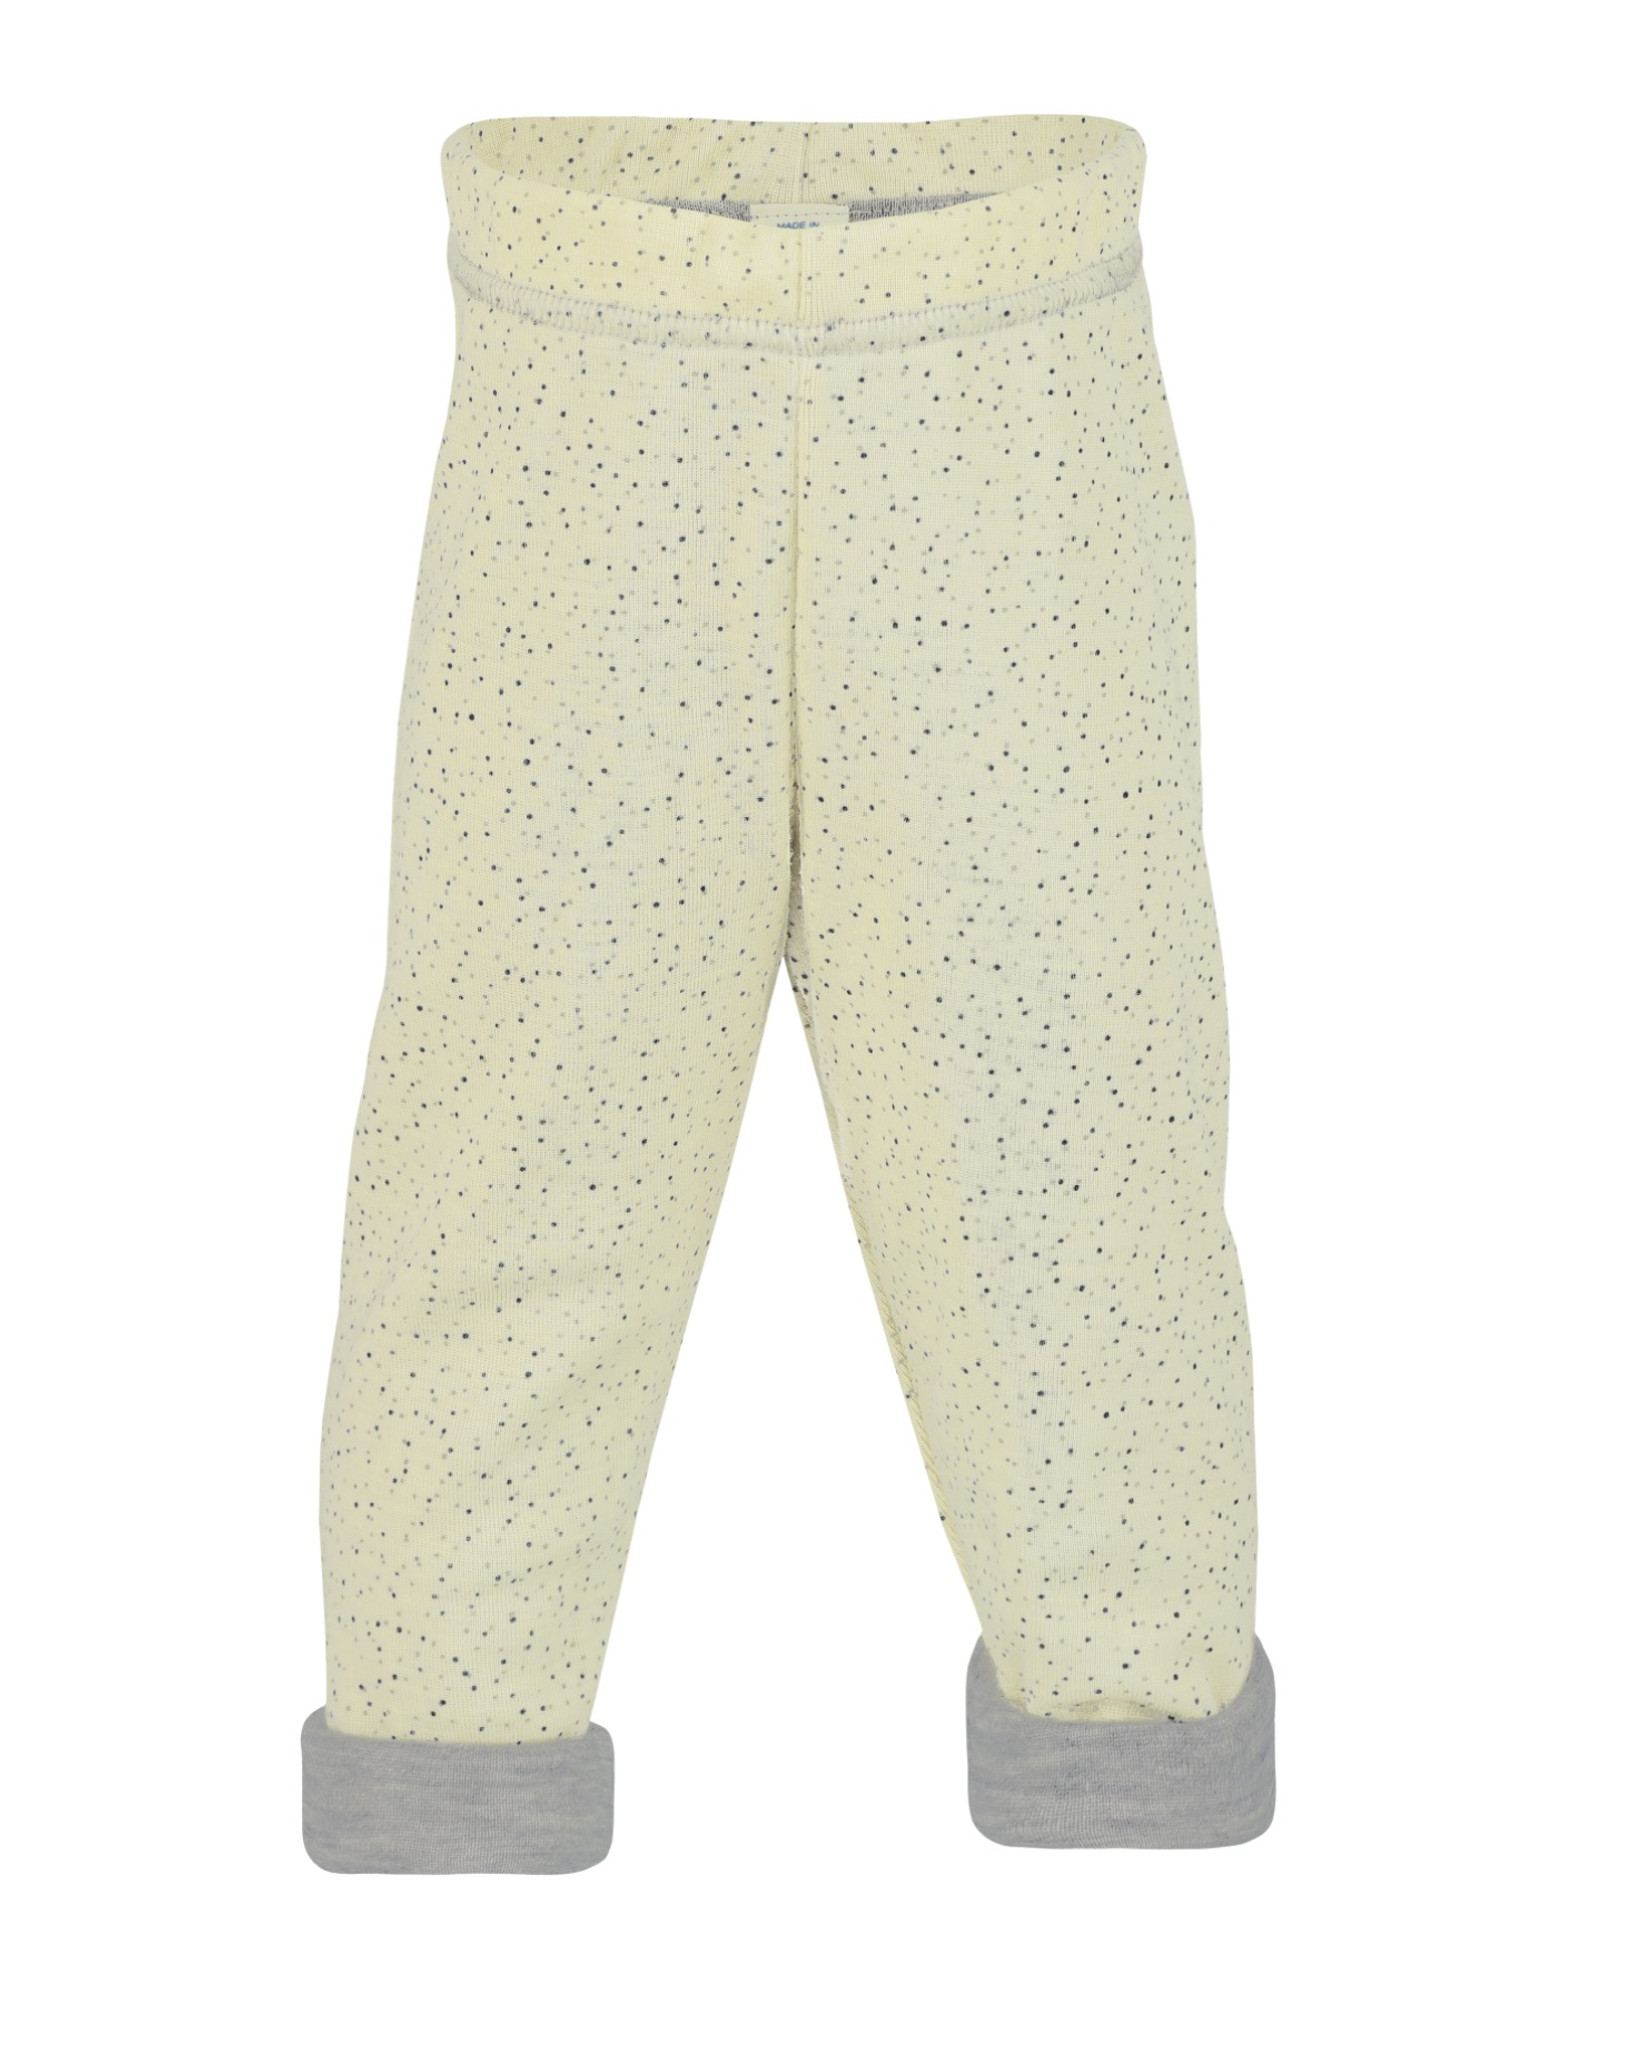 Off White Cotton Pants Fo Baby, Full Length, Printed Pattern, High Quality,  Attractive Design, Contemporary Look, Soft Texture, Skin Friendly,  Comfortable To Wear, Well Stitched, Casual Wear Age Group: 0-2 Years at